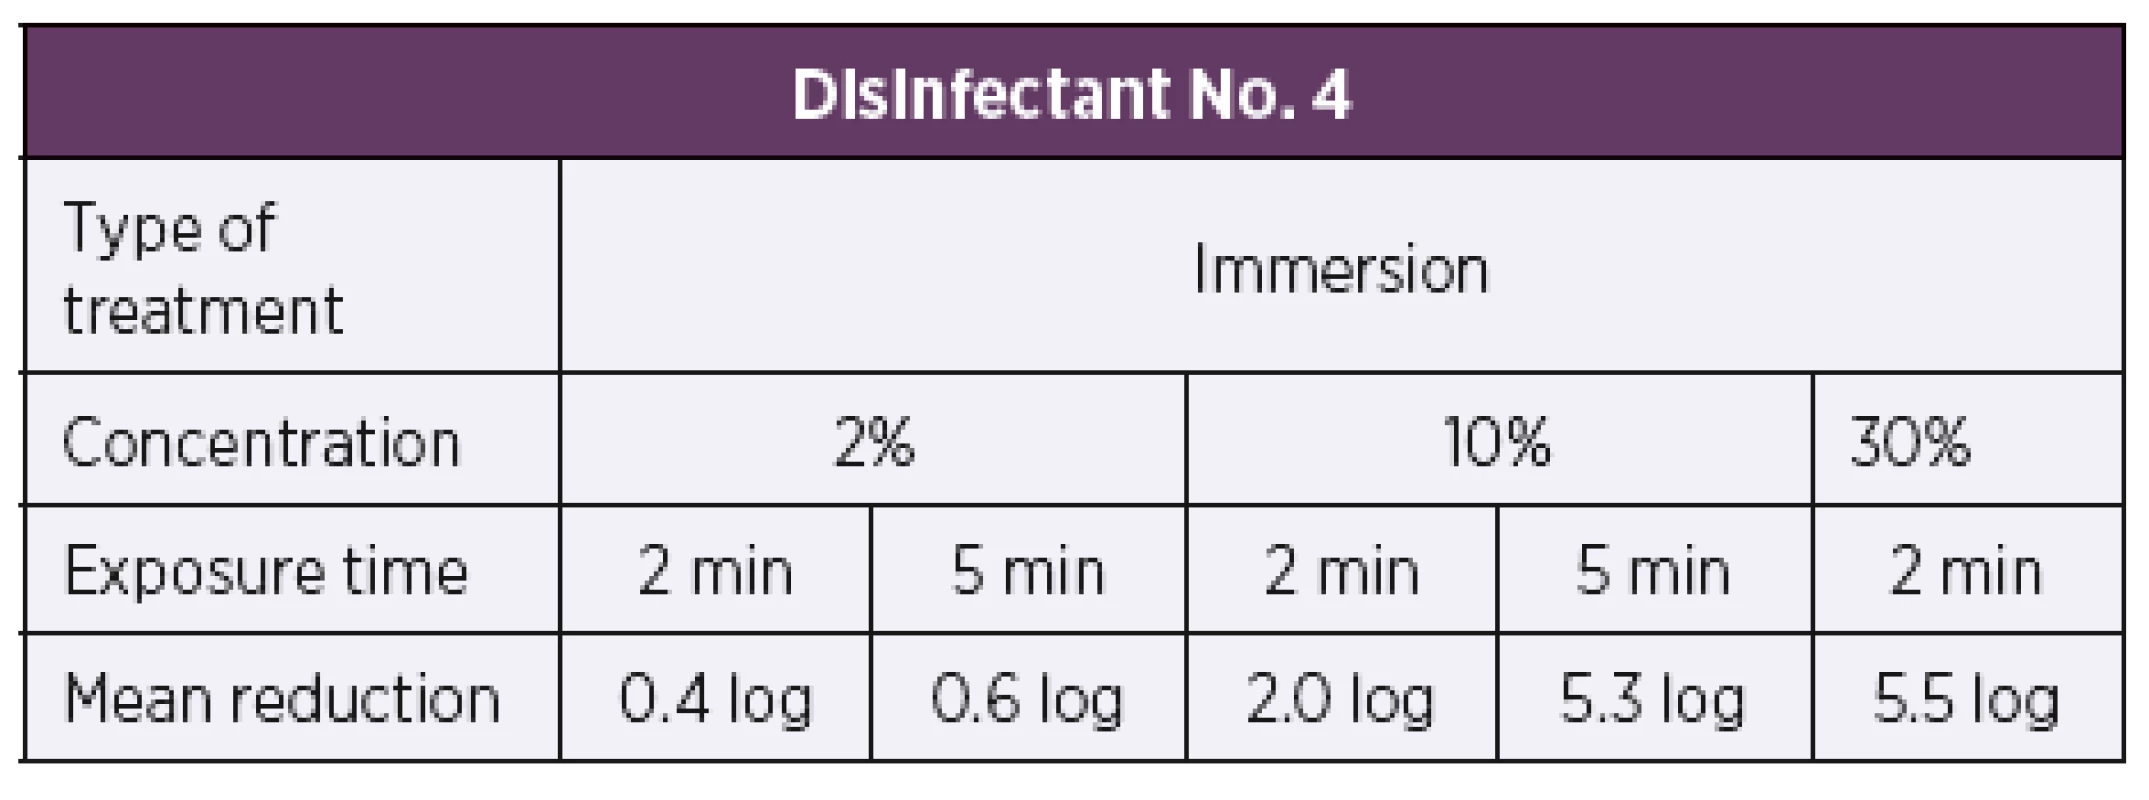 Overview of the mean log reduction in the bacterial counts
achieved with disinfectant No. 4 depending on the concentration and
exposure time.